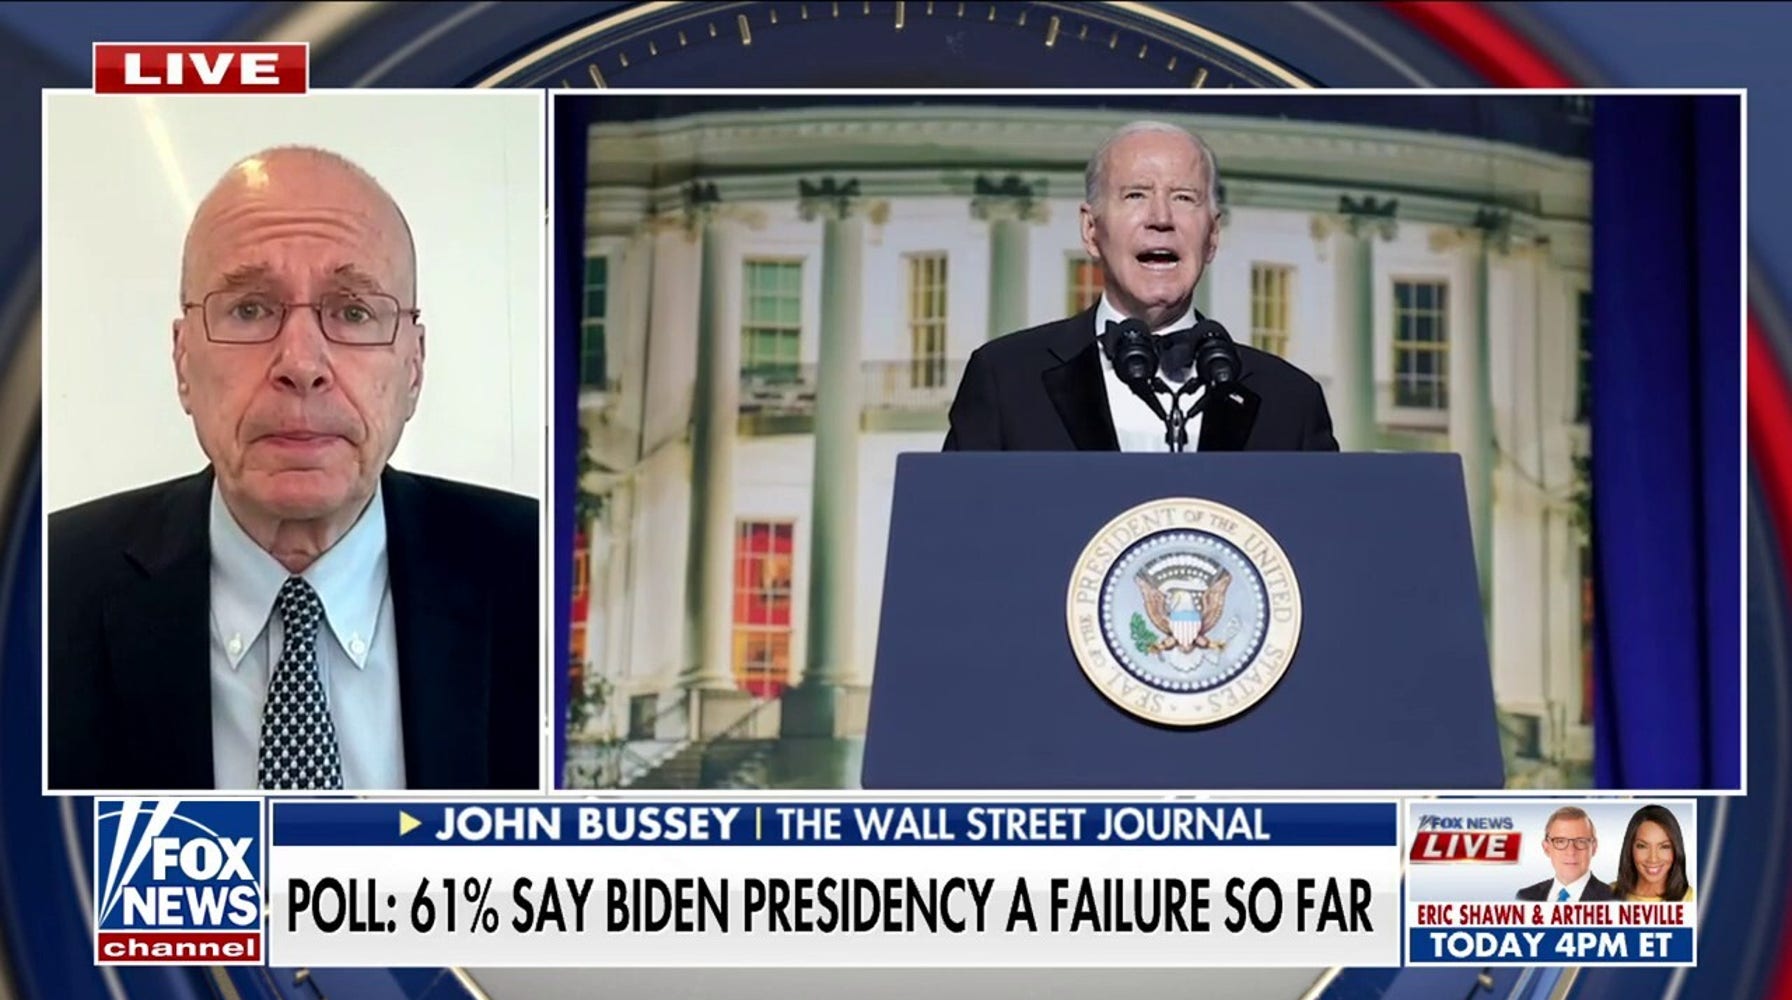 Biden's Re-election Bid Faces Challenges Amidst White House Press Secretary Drama and Negative Polling